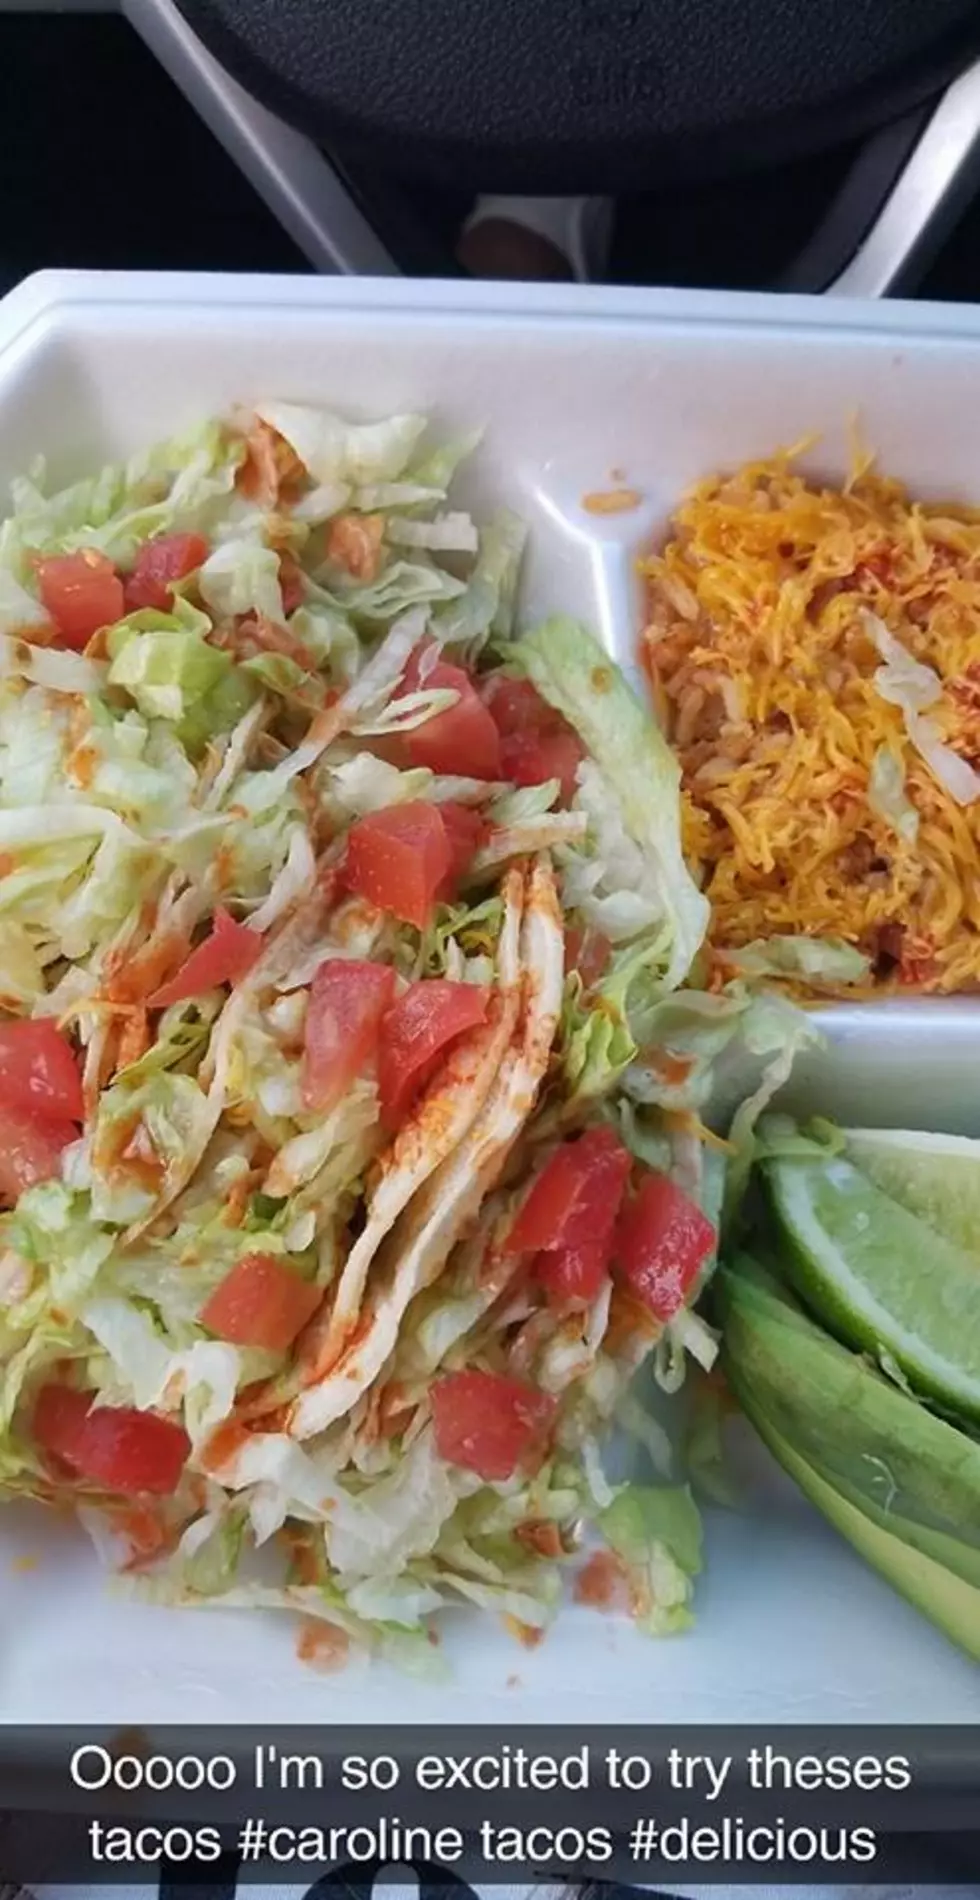 A New Lubbock Restaurant Will Have You Saying &#8216;Let&#8217;s Taco About It&#8217;